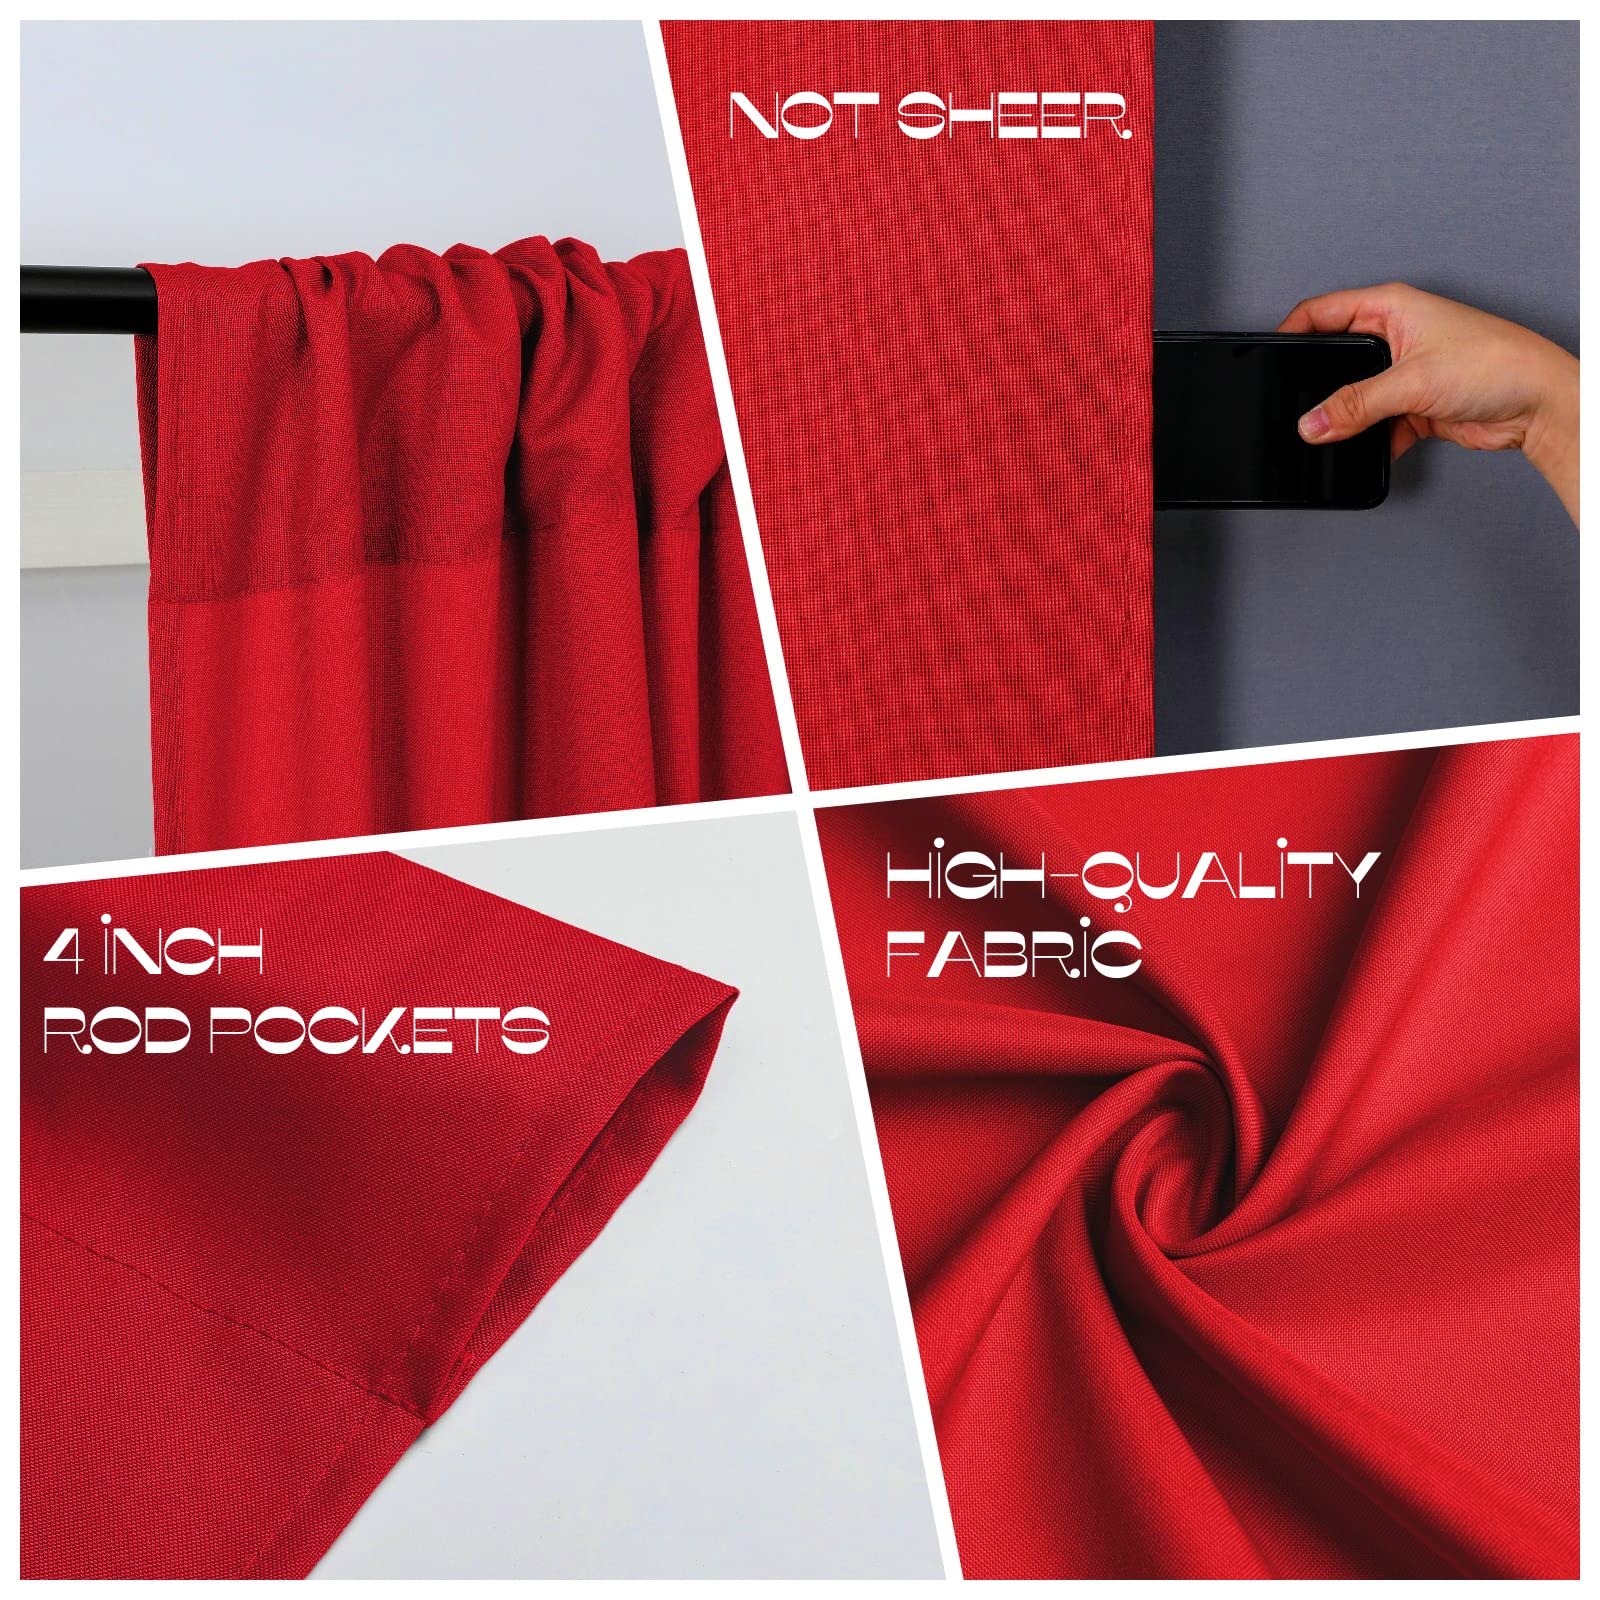 Joydeco Christamas Red Backdrop Curtains for Parties, Photography Backdrop Drapes for Wedding Christamas Decorations, Wrinkle Free 5ft x 10ft Set of 2 Panels Curtains with Rod Pockets